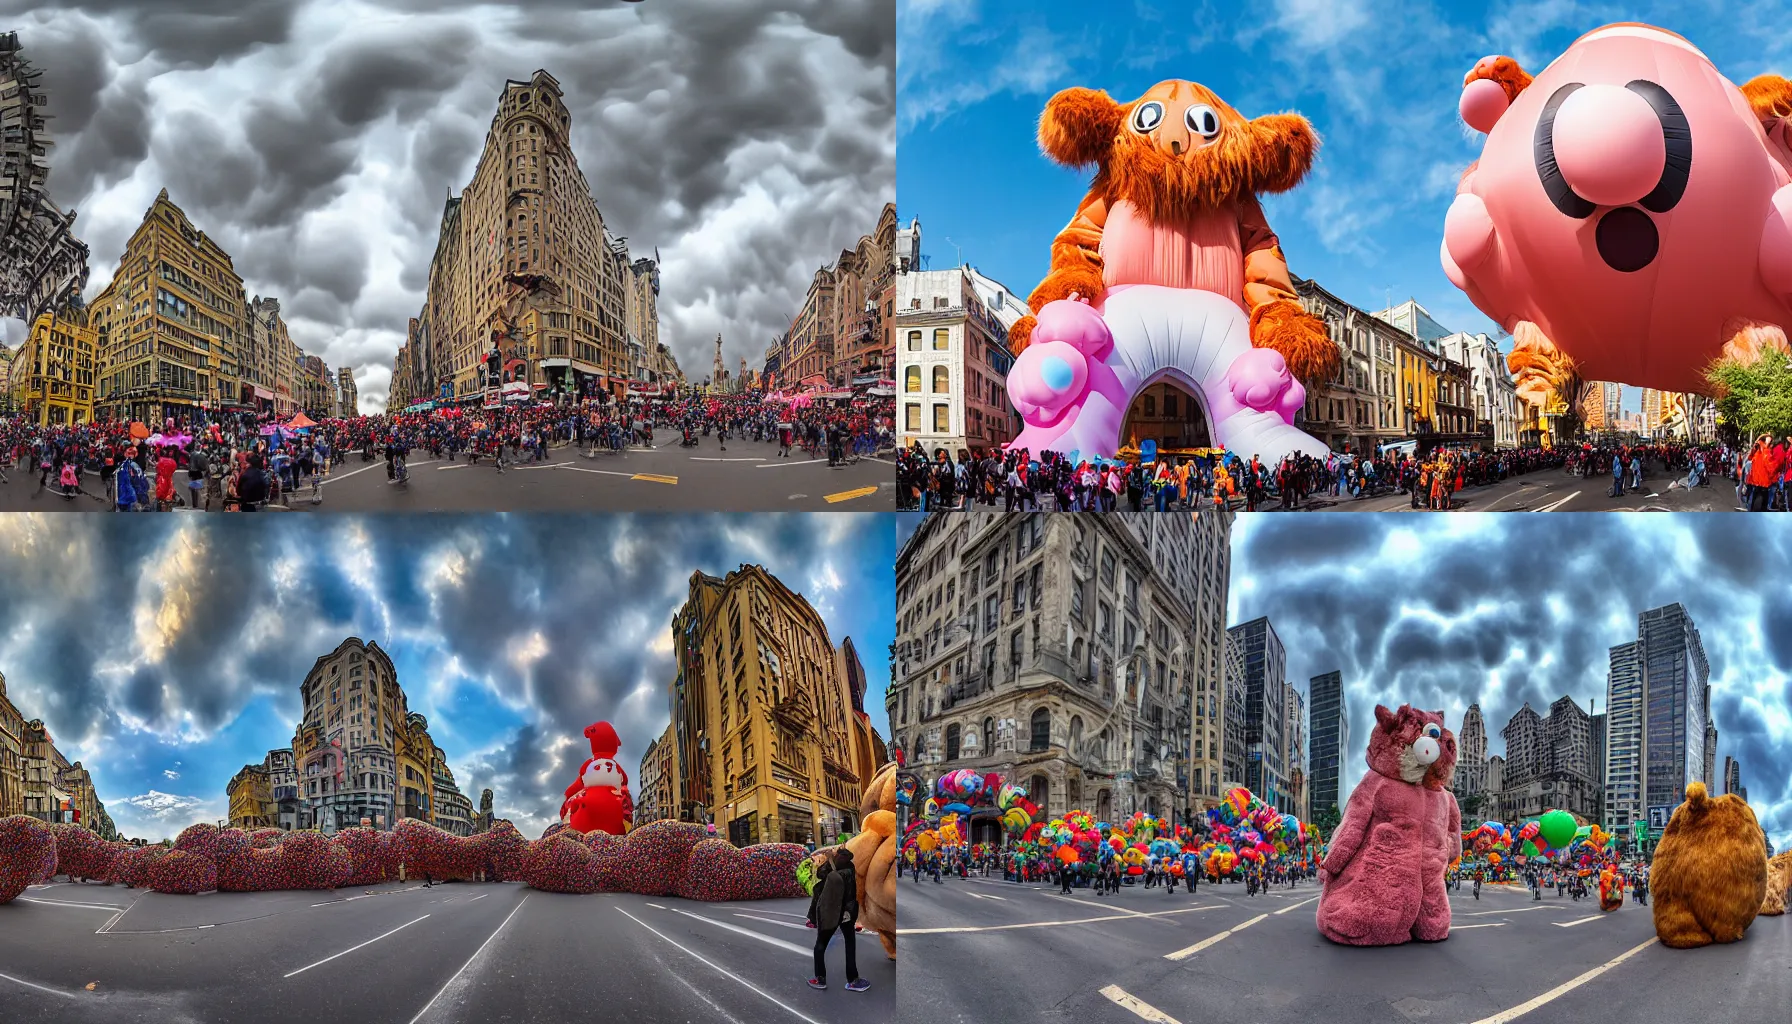 Prompt: a professional photograph of a very giant huge inflatable parade balloon of an very uncanny and unidentifiable furry animal that nearly fills a very beautiful city street. The furry balloon nearly fills the frame like a Kaiju attacking the city. Mammatus clouds worms eye shot, wide-angle, racking focus, extreme panoramic, Dynamic Range, HDR, chromatic aberration, Orton effect, Photo by Marc Adamus, Ryan Dyar, Ezra Stoller, and Andres Gursky